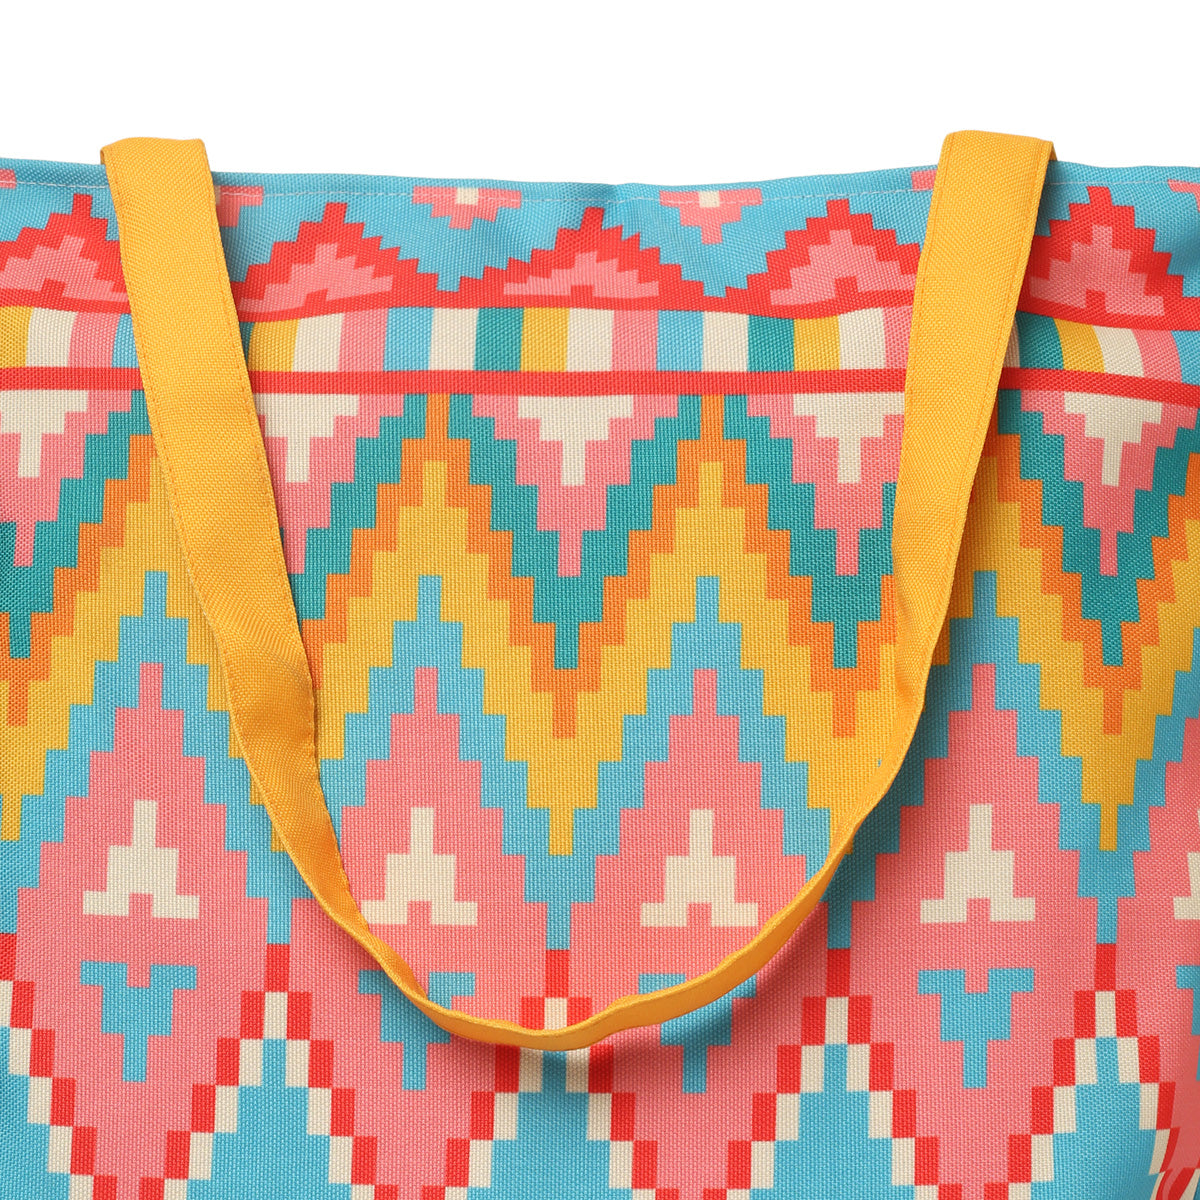 Bright tote bag with colorful shapes.